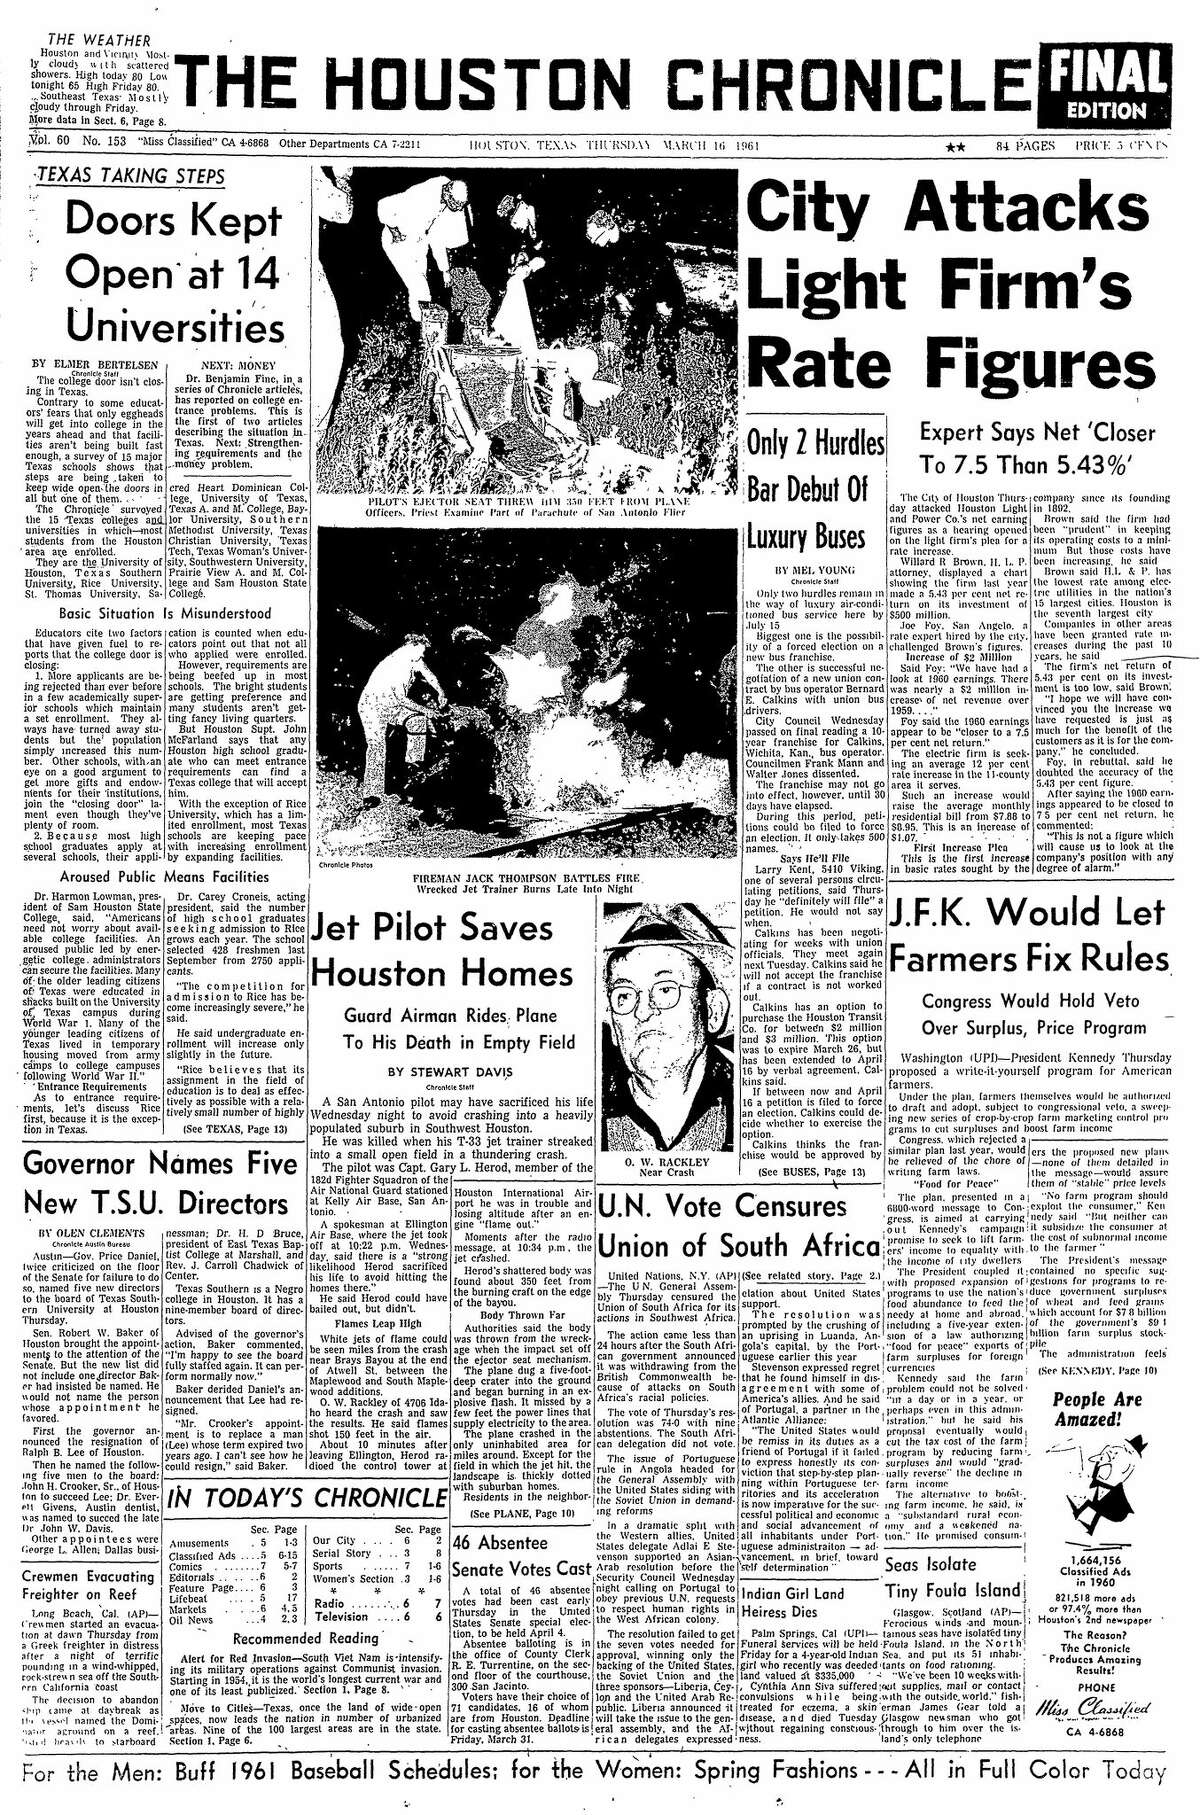 Houston Chronicle front page from March 16, 1961.